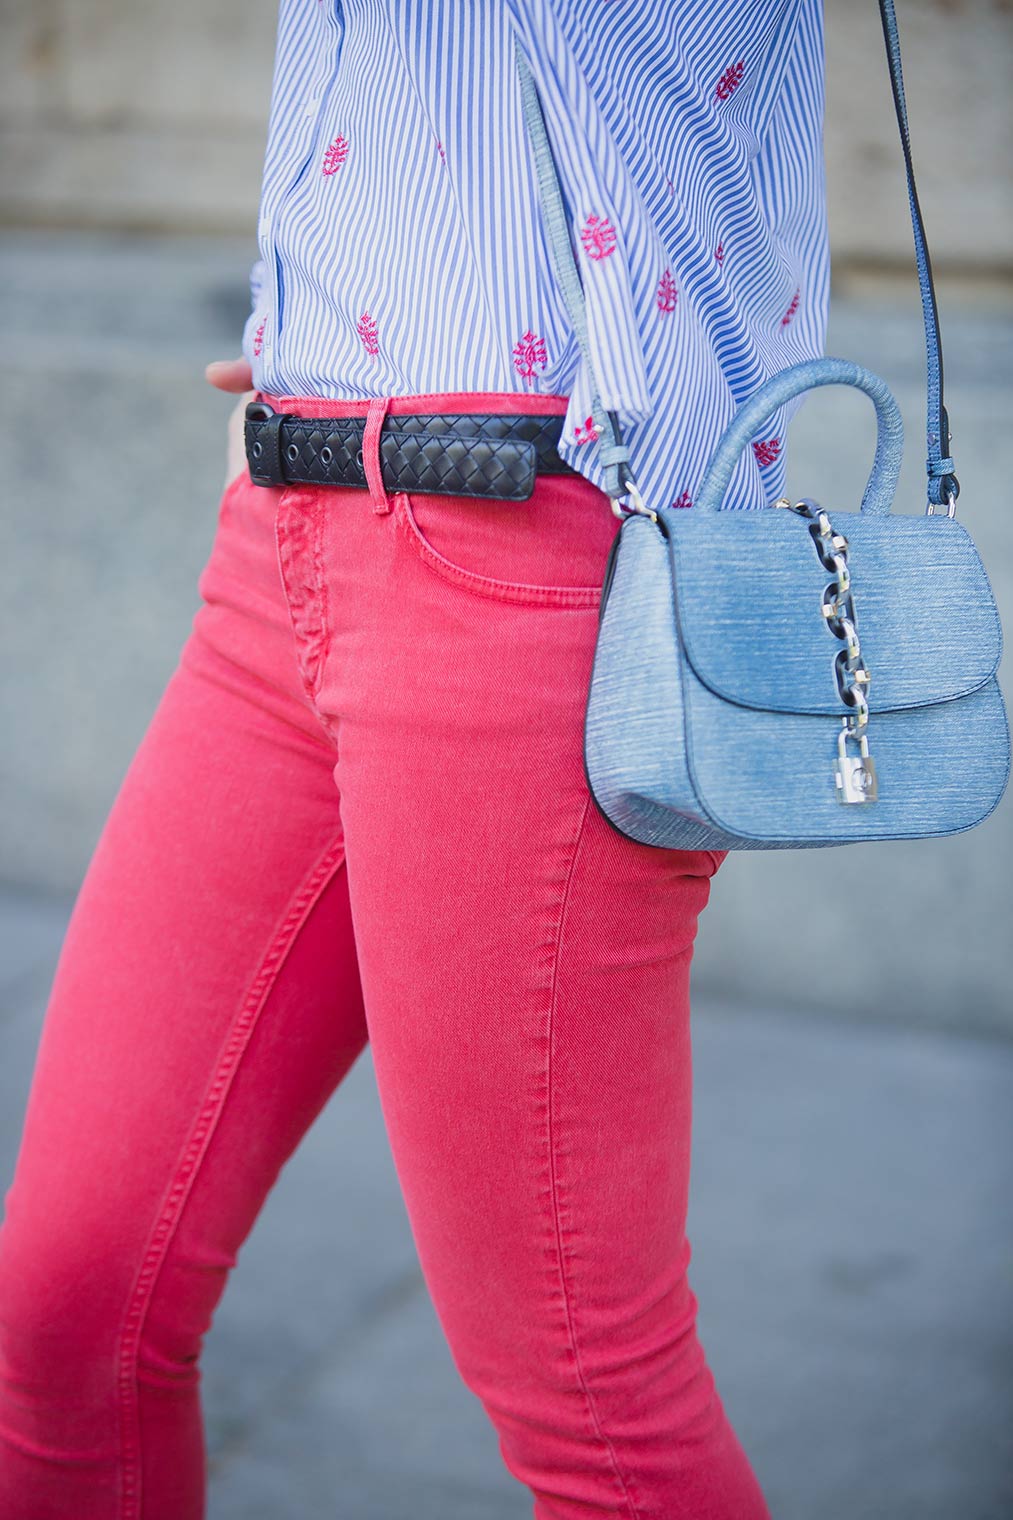 Chic Journal Petra wearing Louis Vuitton Chain It Bag and red jeans